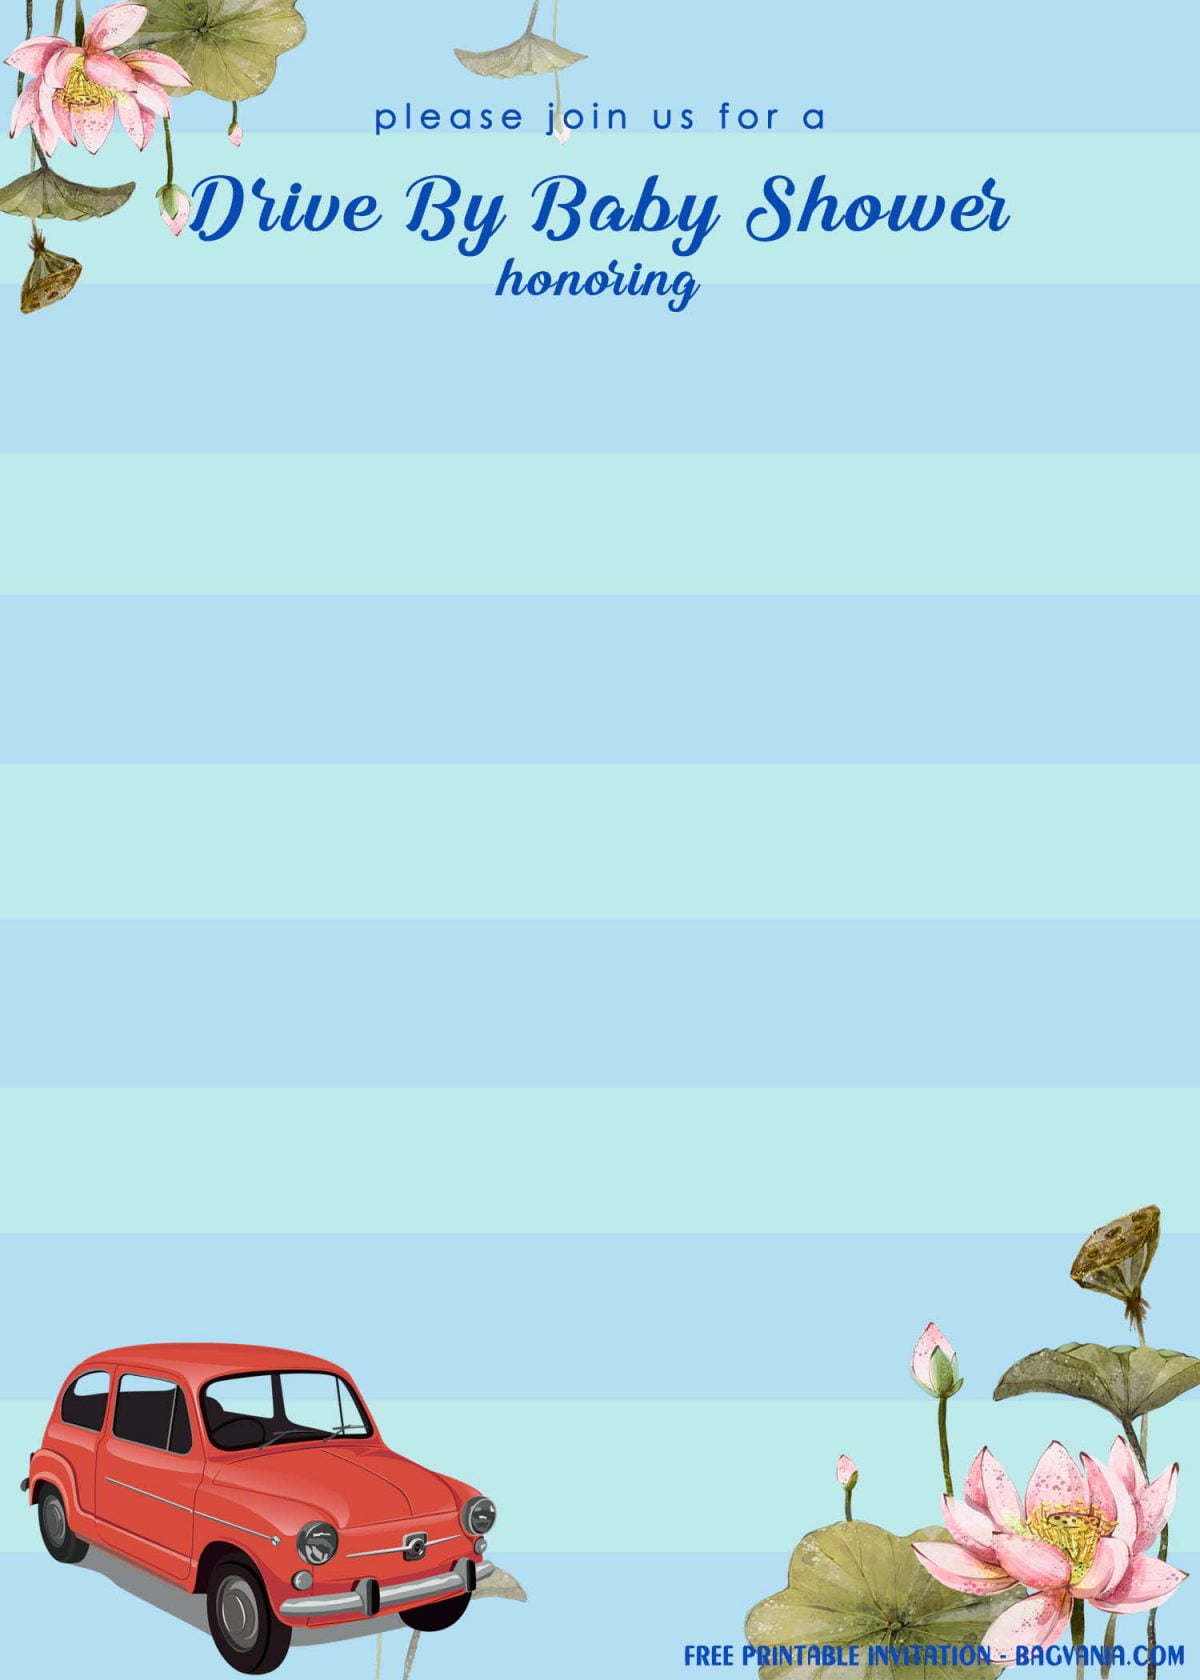 Free Printable Blue Stripes Drive By Baby Shower Invitation Templates With Retro Car Image